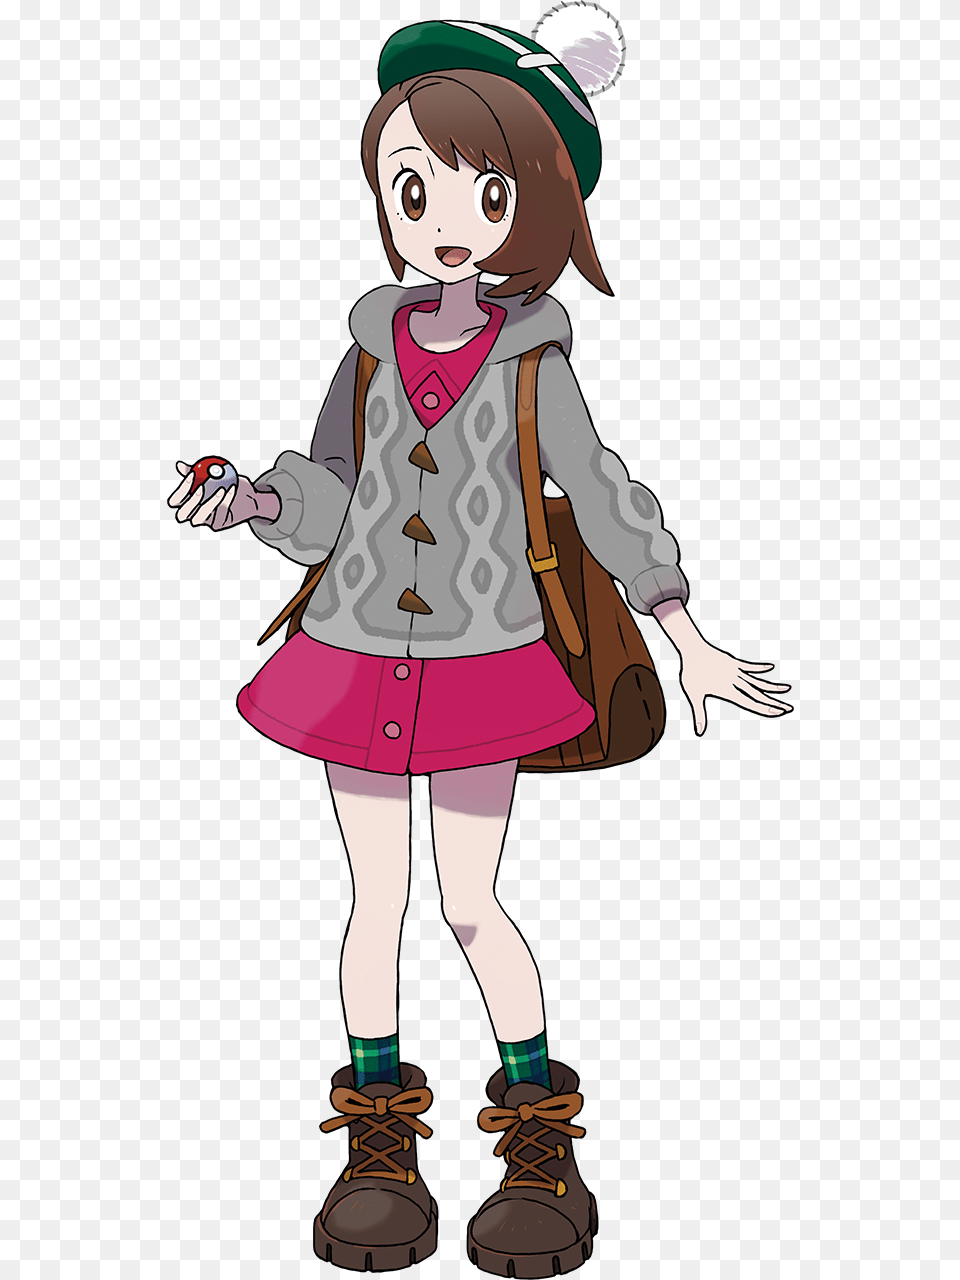 Names In Pokemon Sword And Shield Pokemon Sword And Shield Trainer, Book, Publication, Comics, Person Png